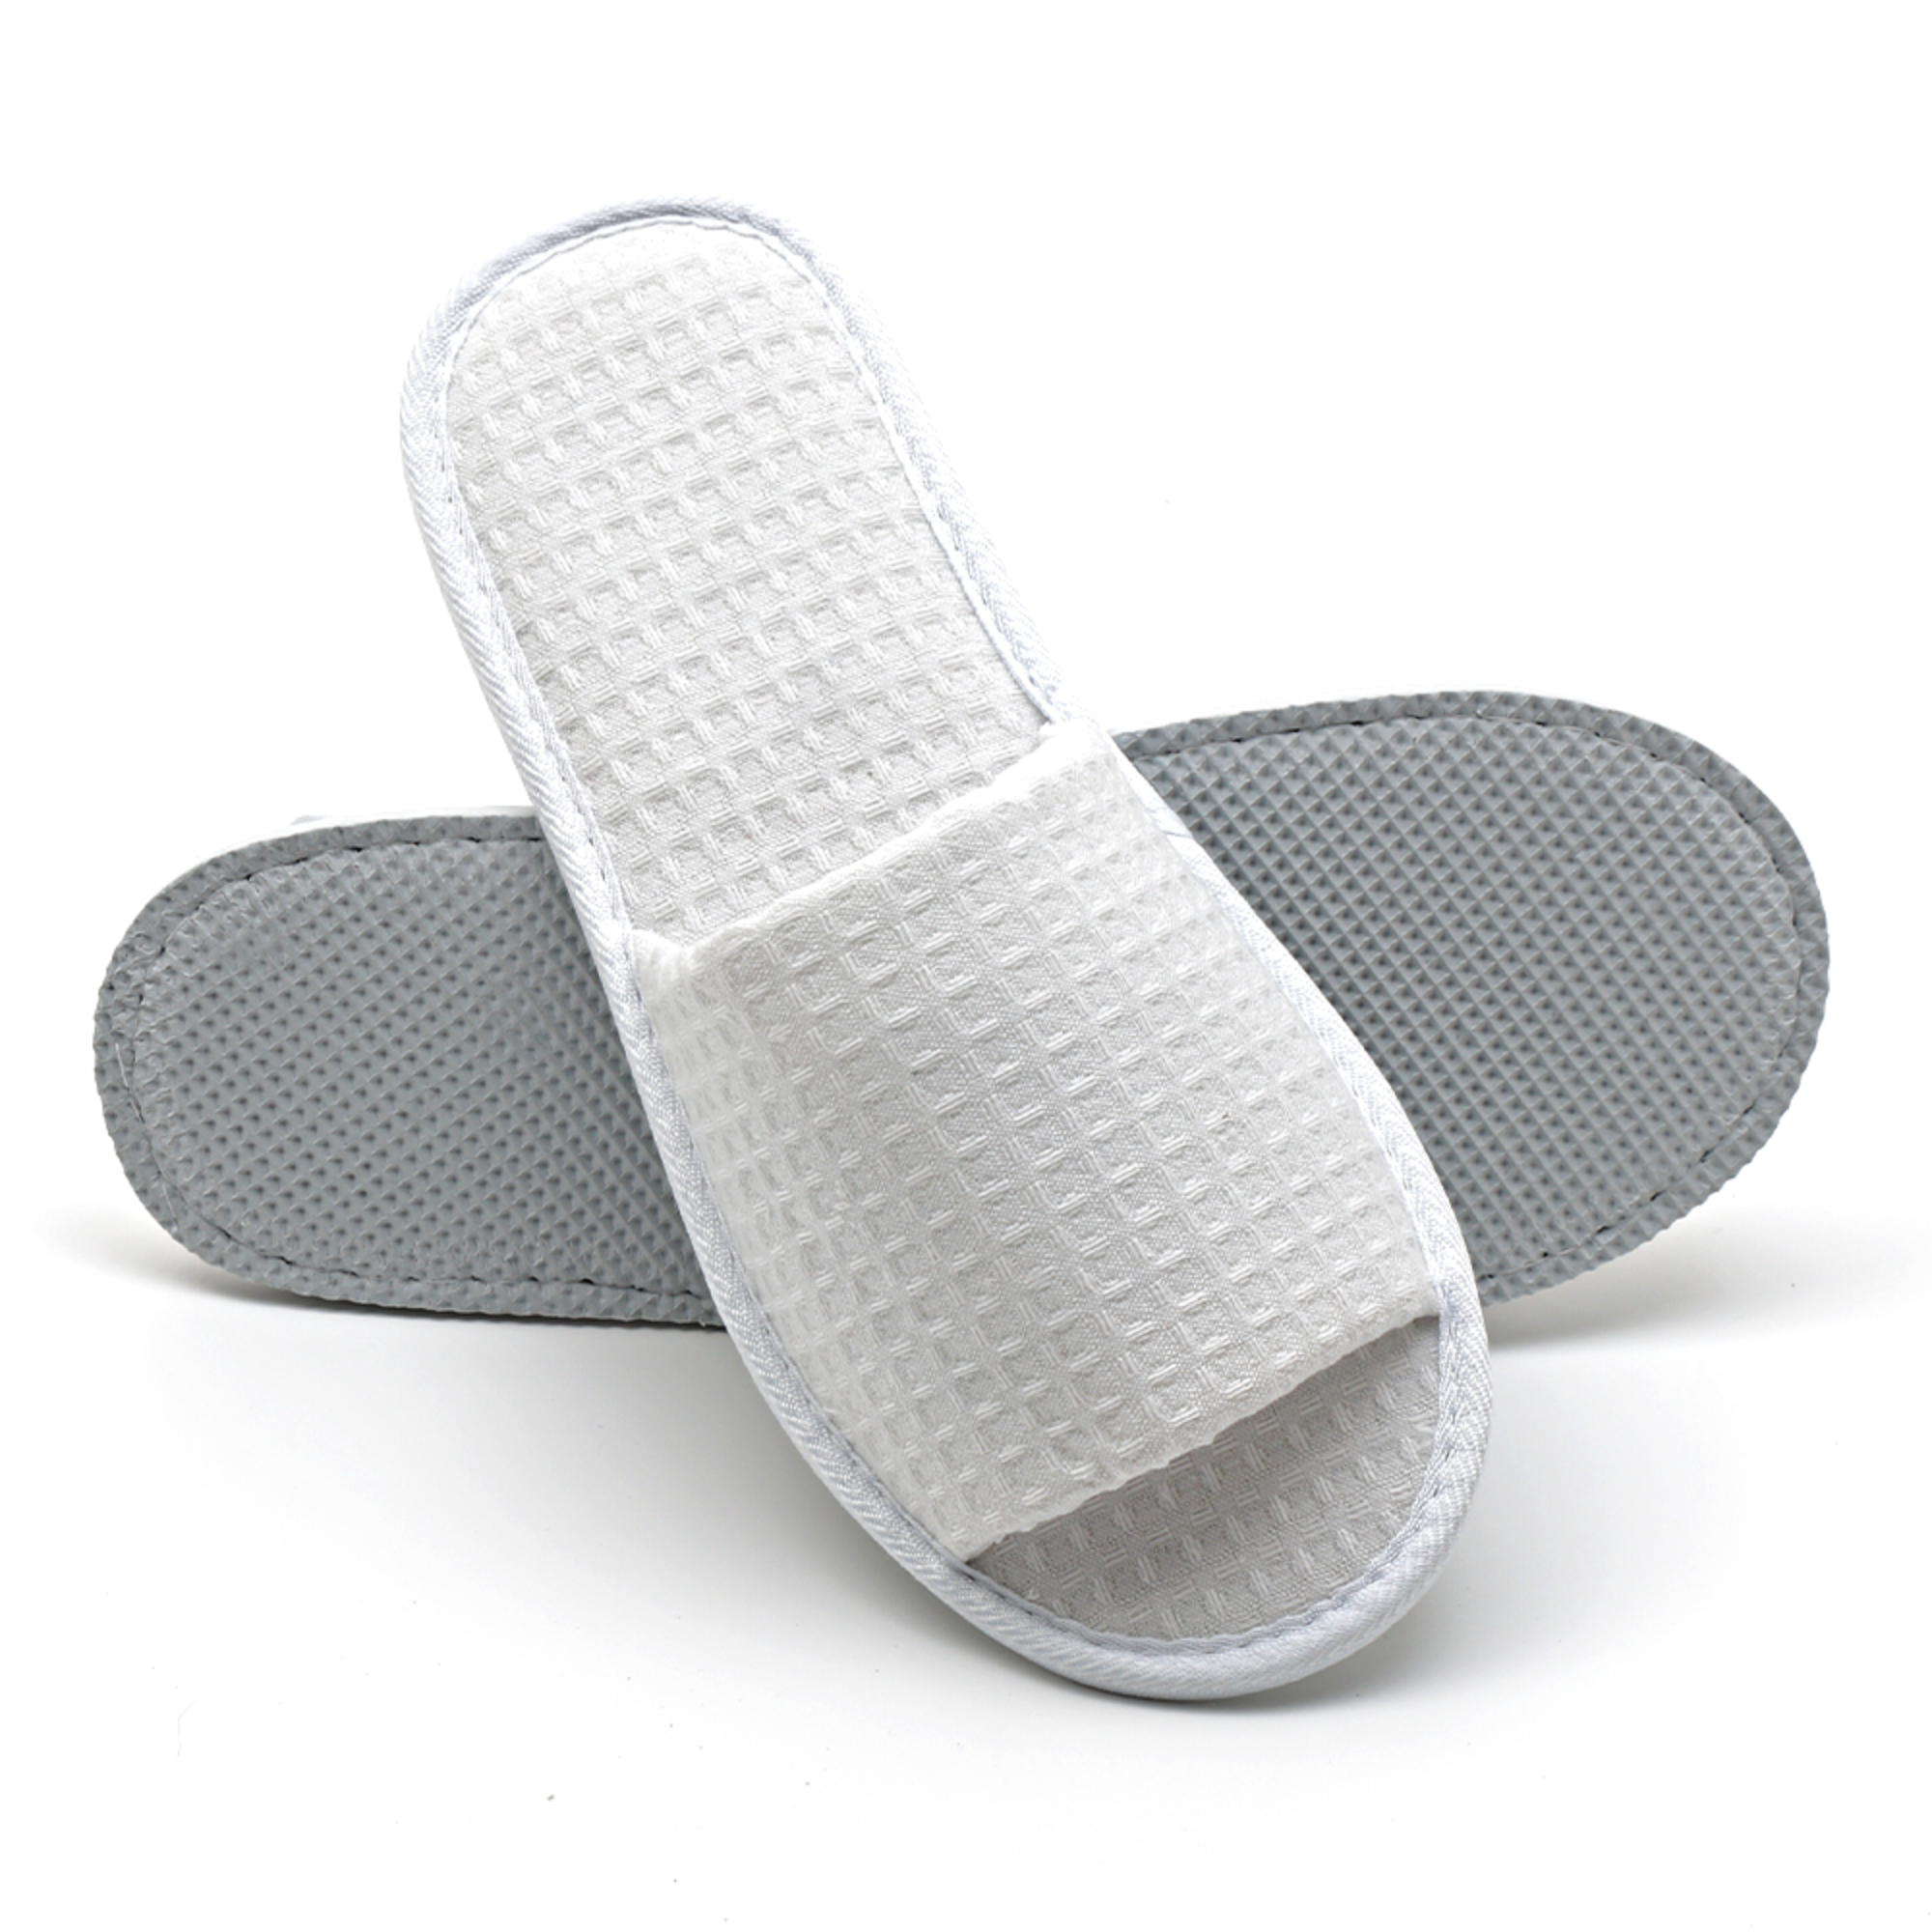 Terry Cloth Waffle Open Toe Spa Hotel Disposable Slippers 